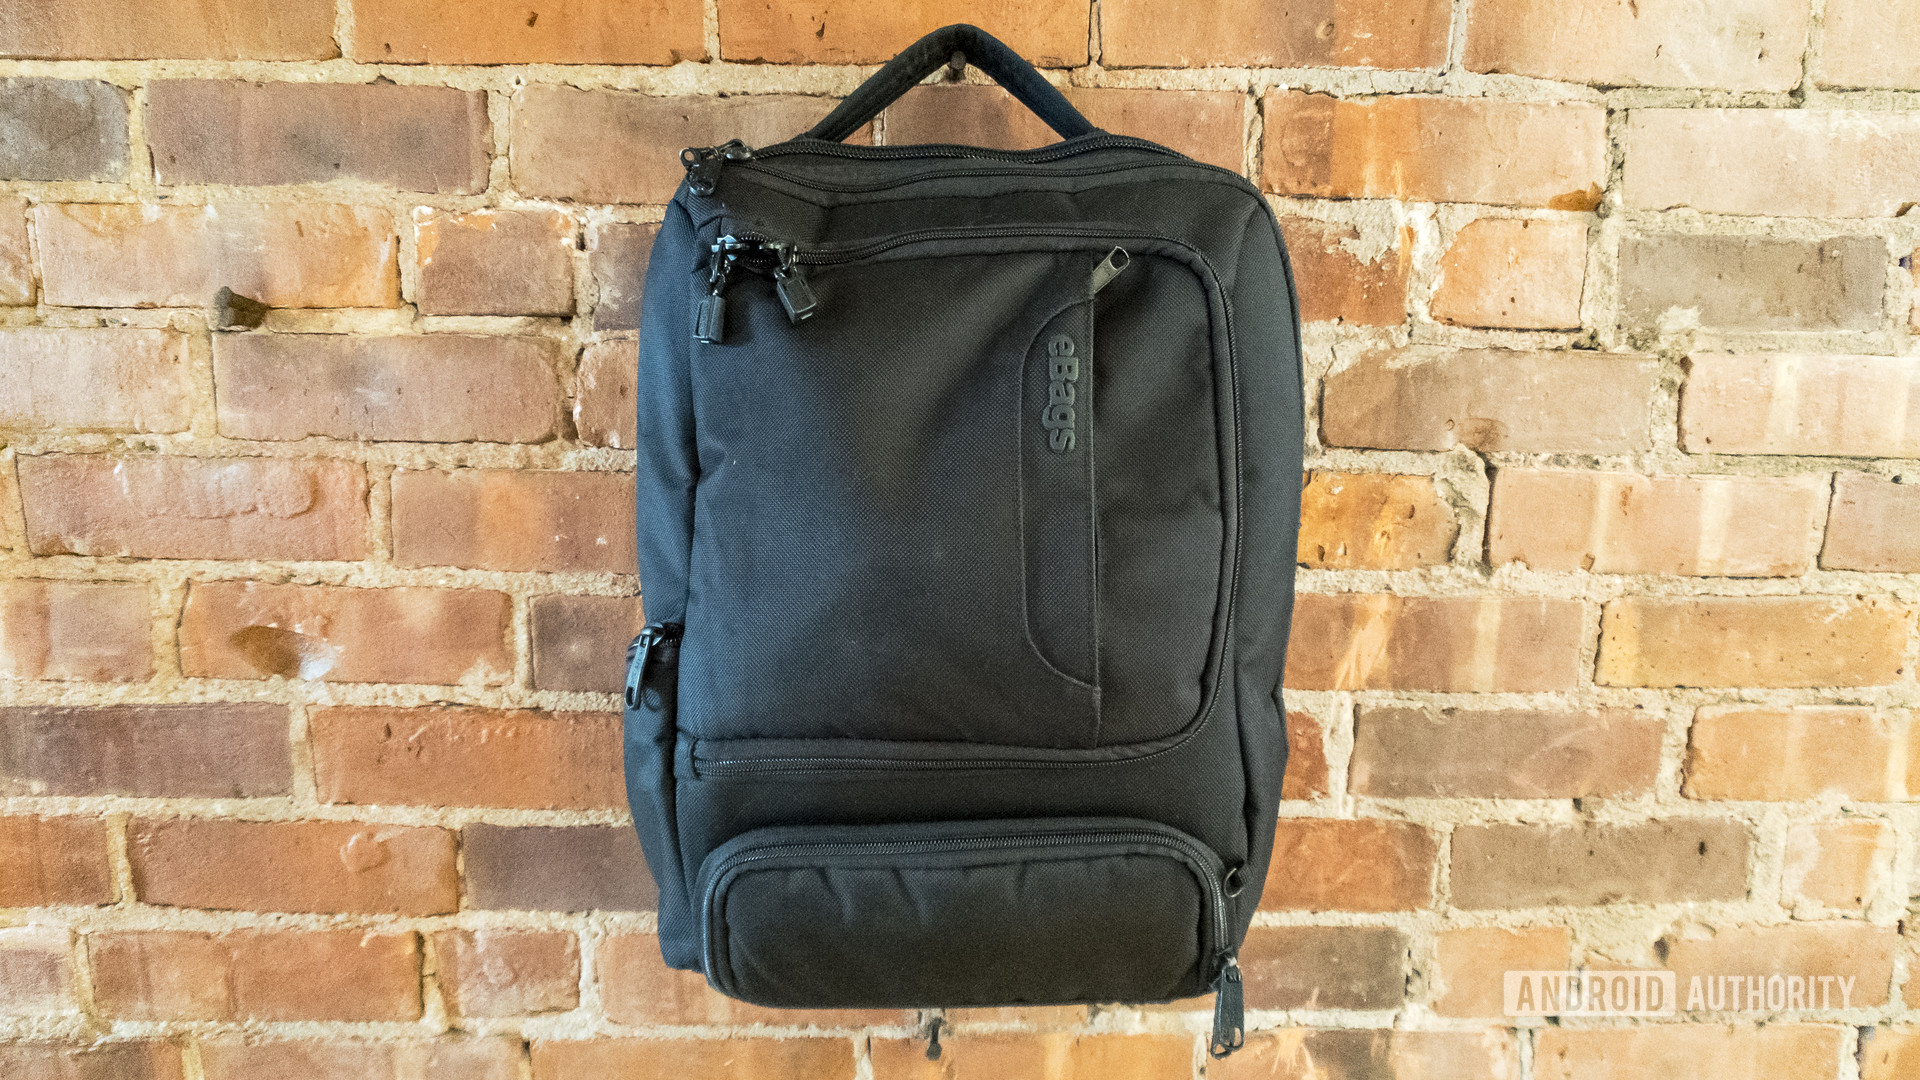 An image of the eBags Professional Slim Junior Laptop Backpack hanging on a brick wall.